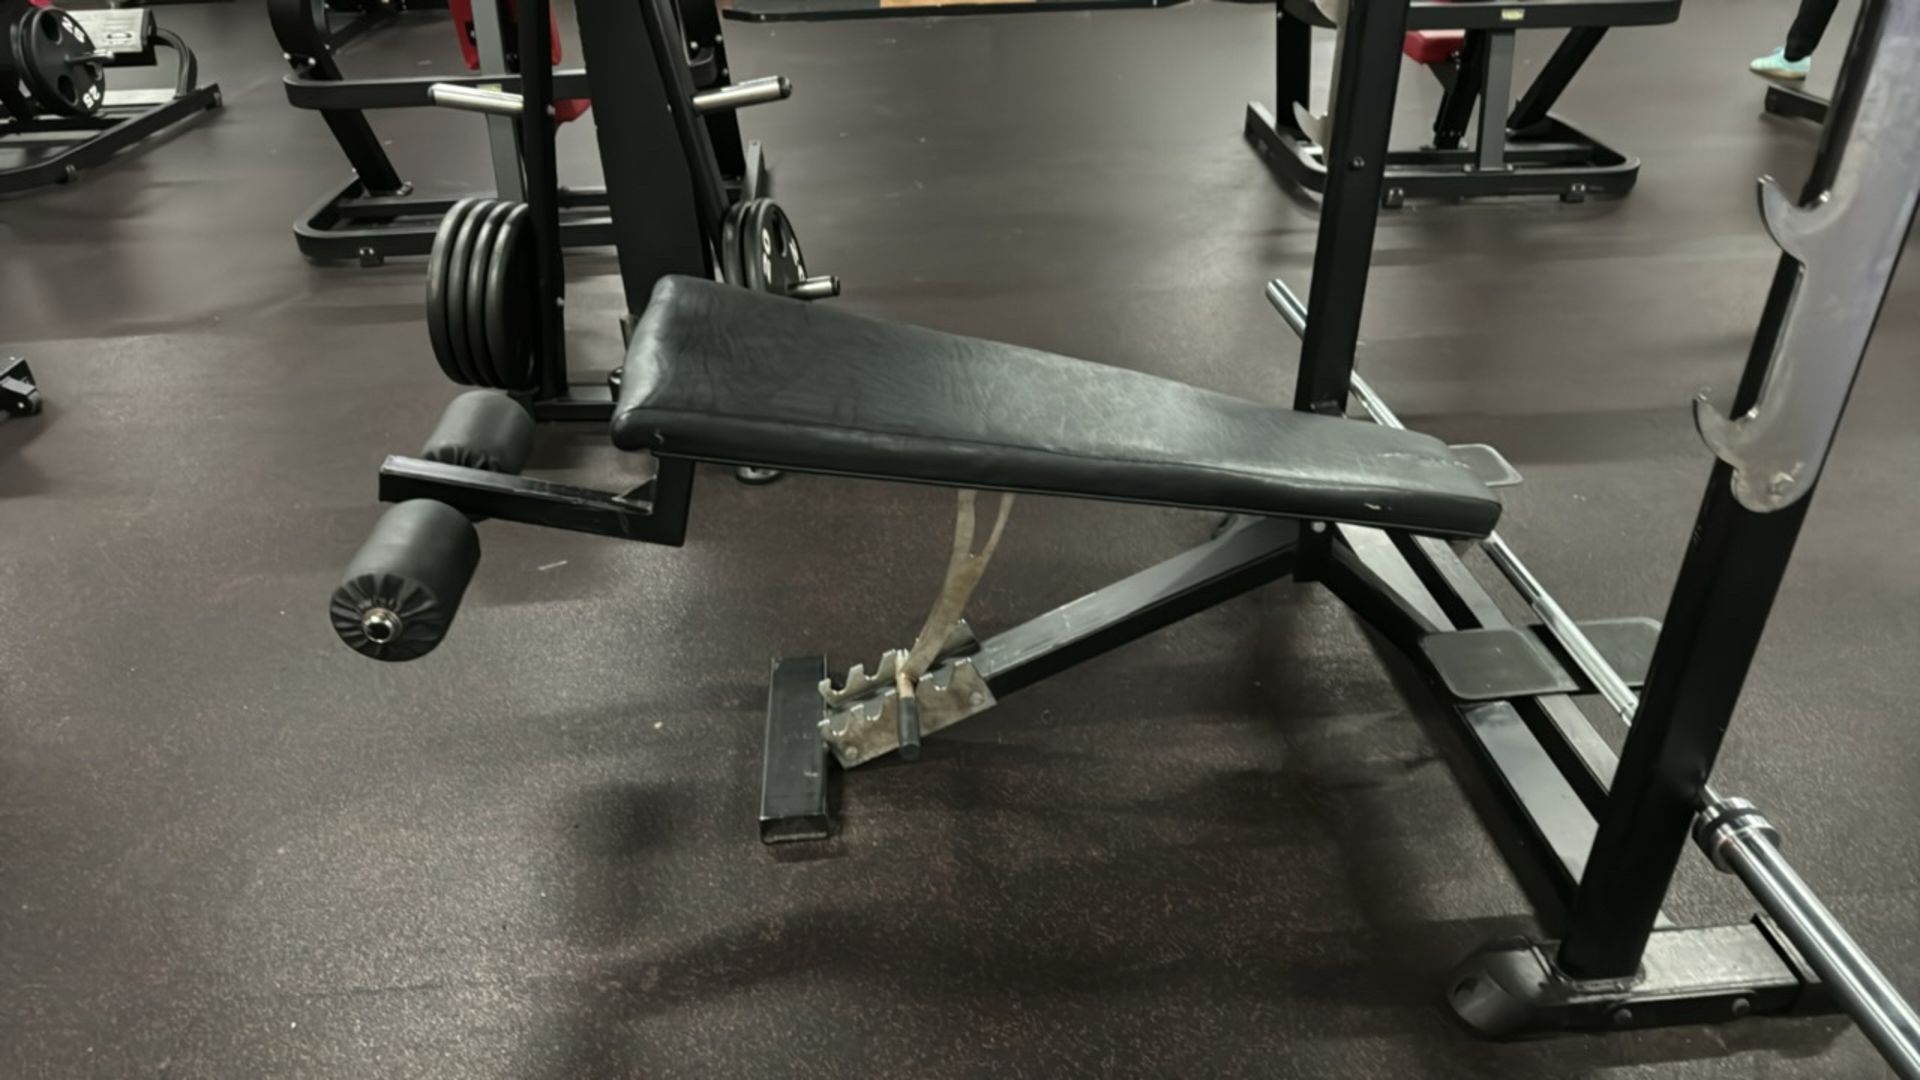 Decline Chest Press Station - Image 3 of 4